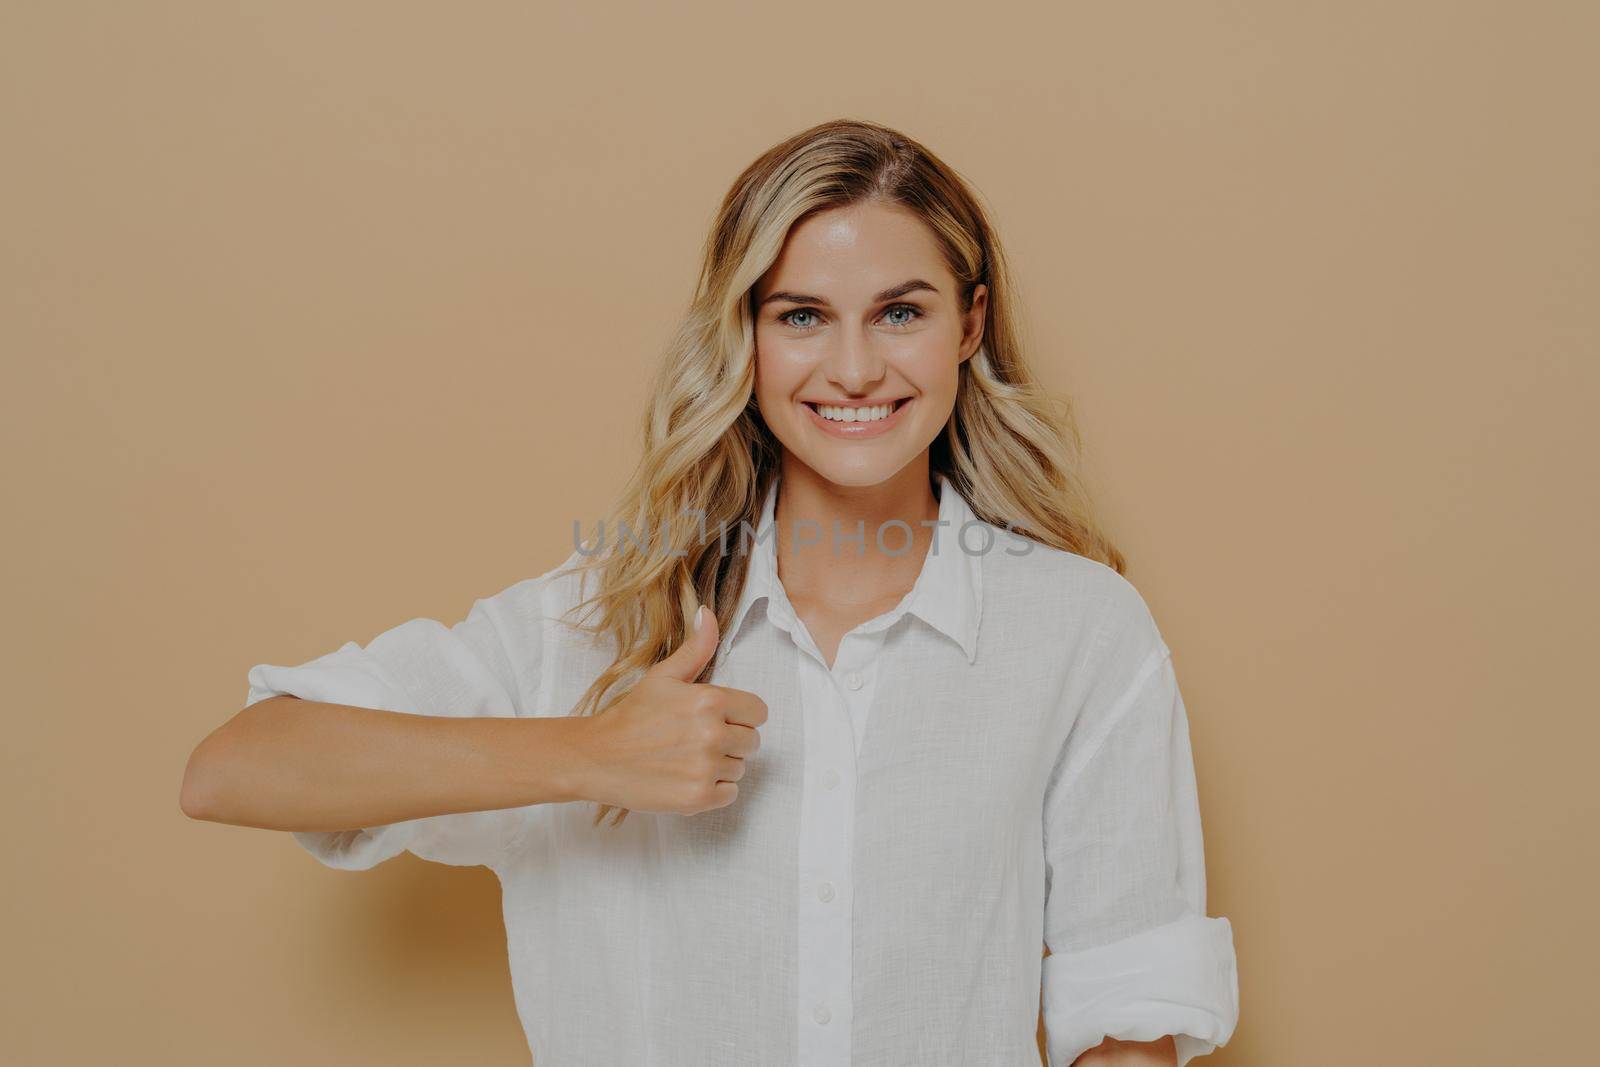 Portrait of positive young woman with broad smile showing thumb up gesture with hand by vkstock